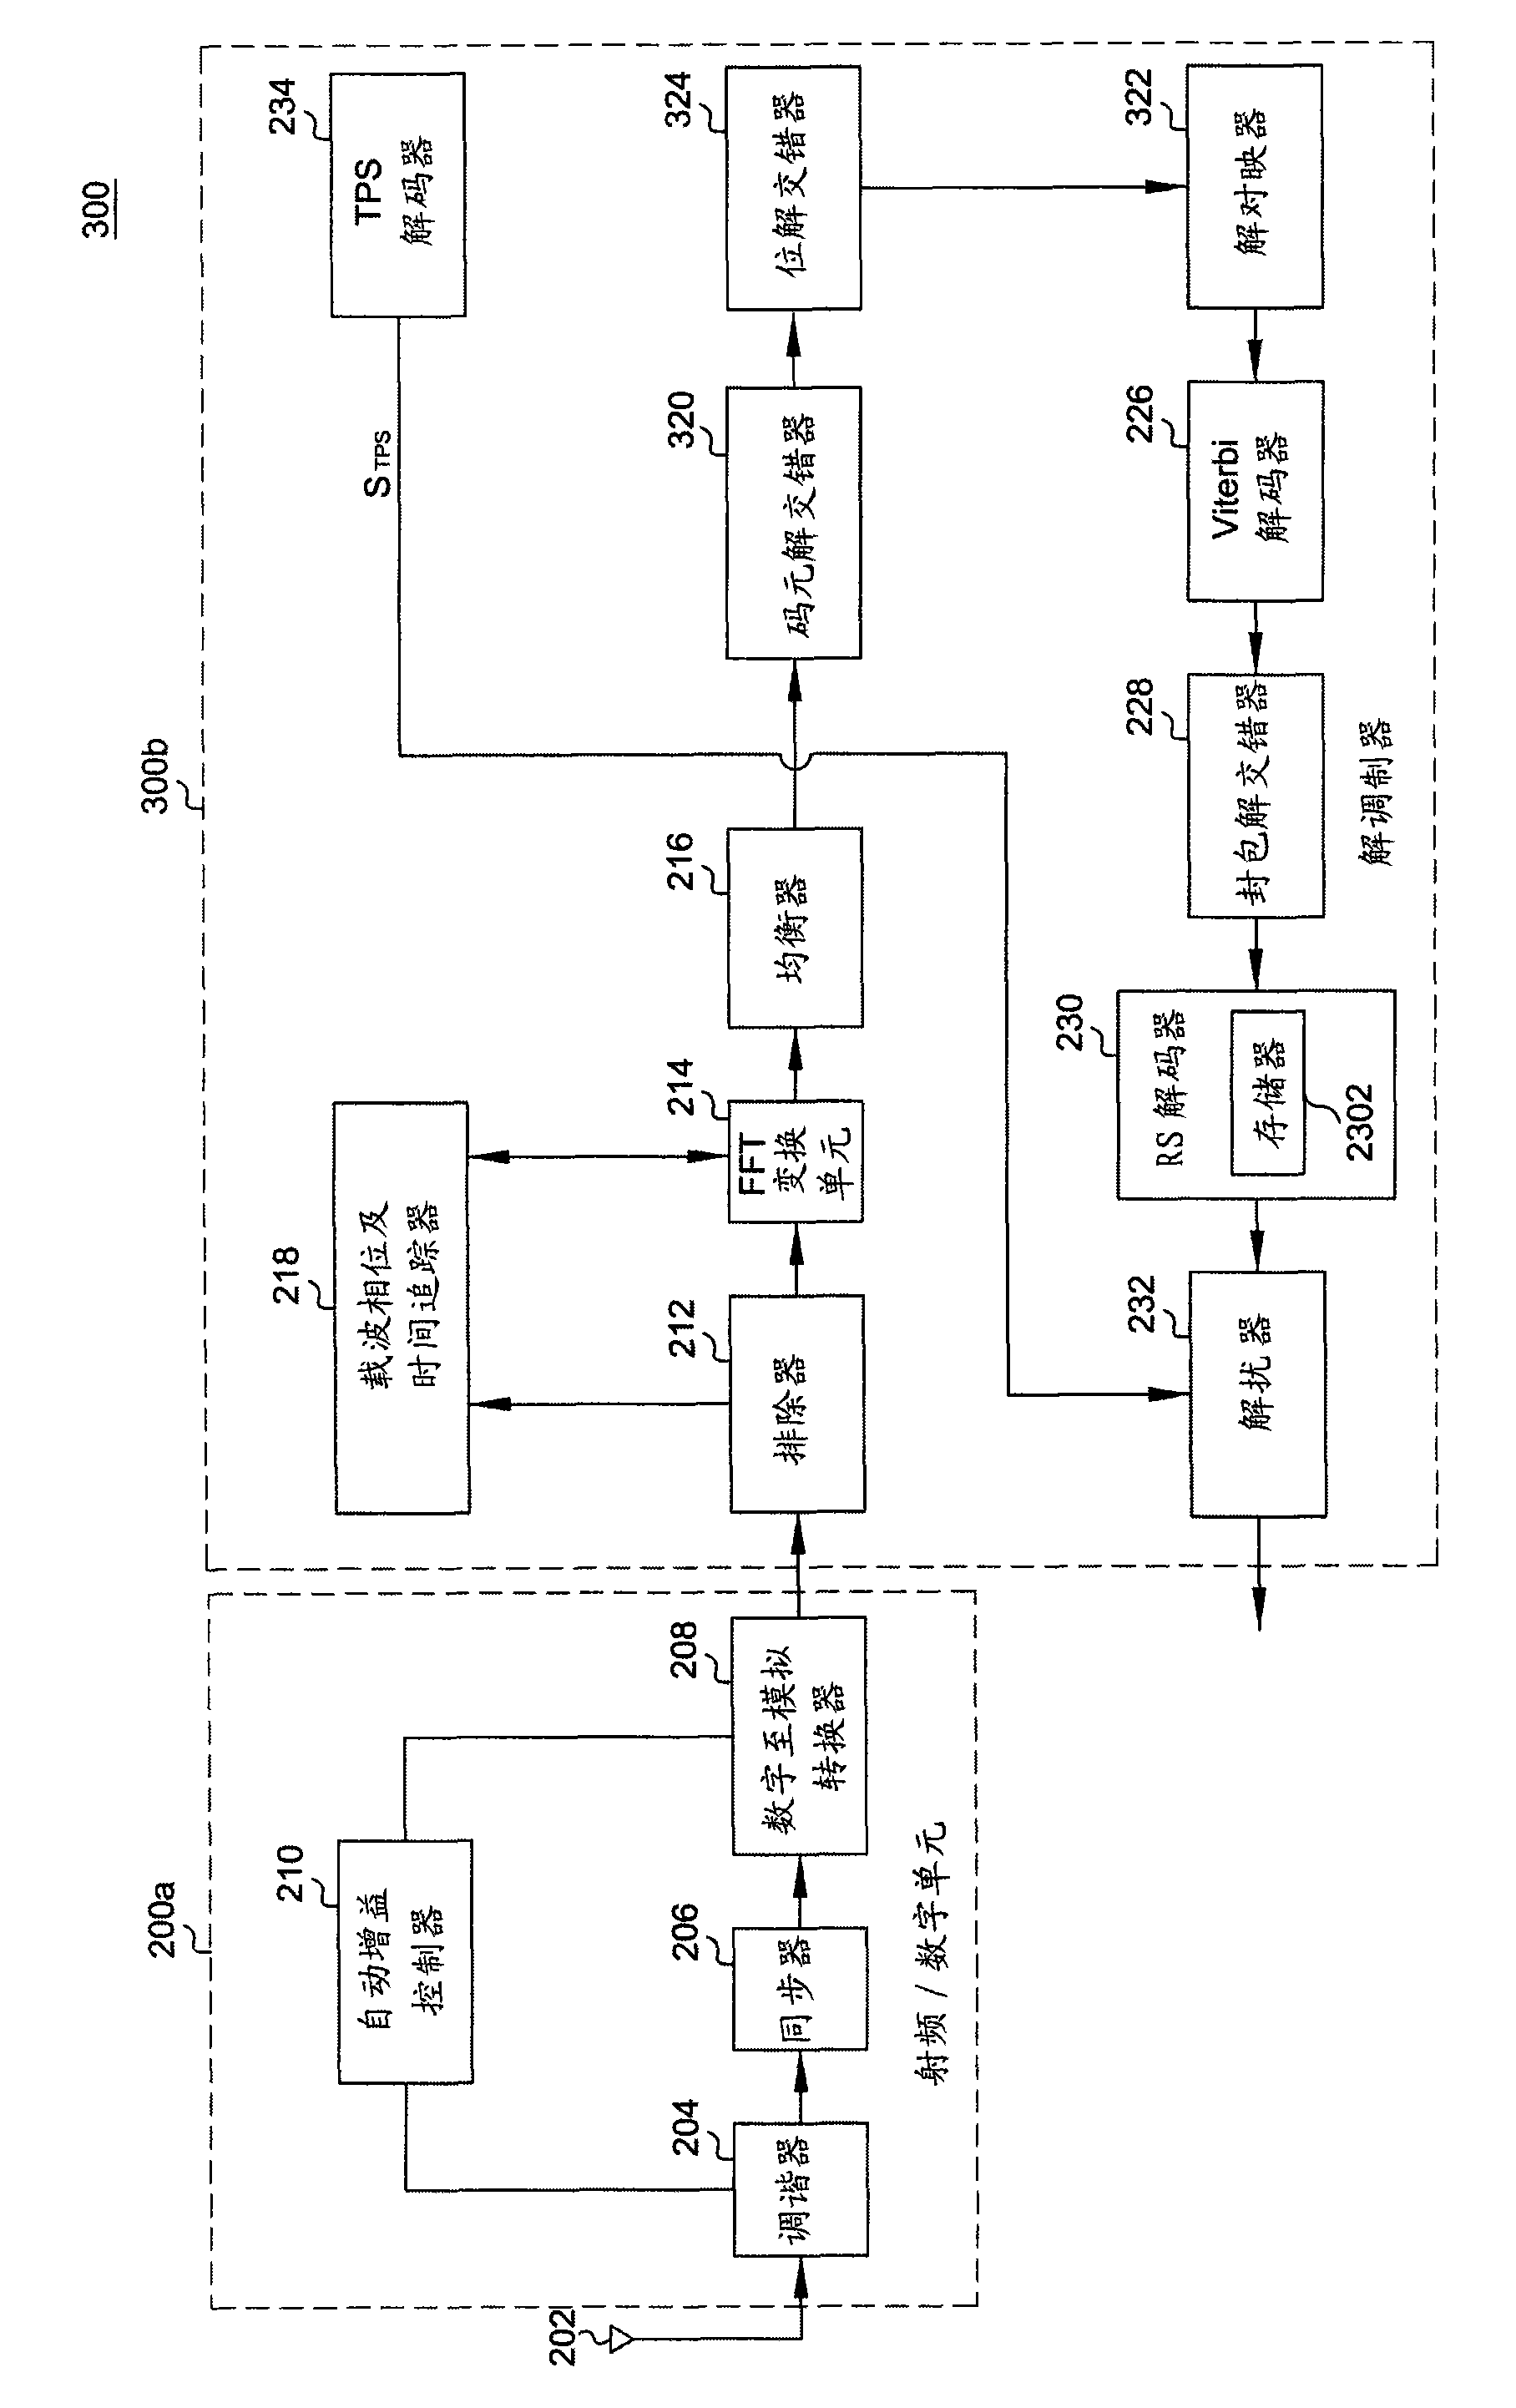 Receiver for reducing program clock reference jitter and demodulation method